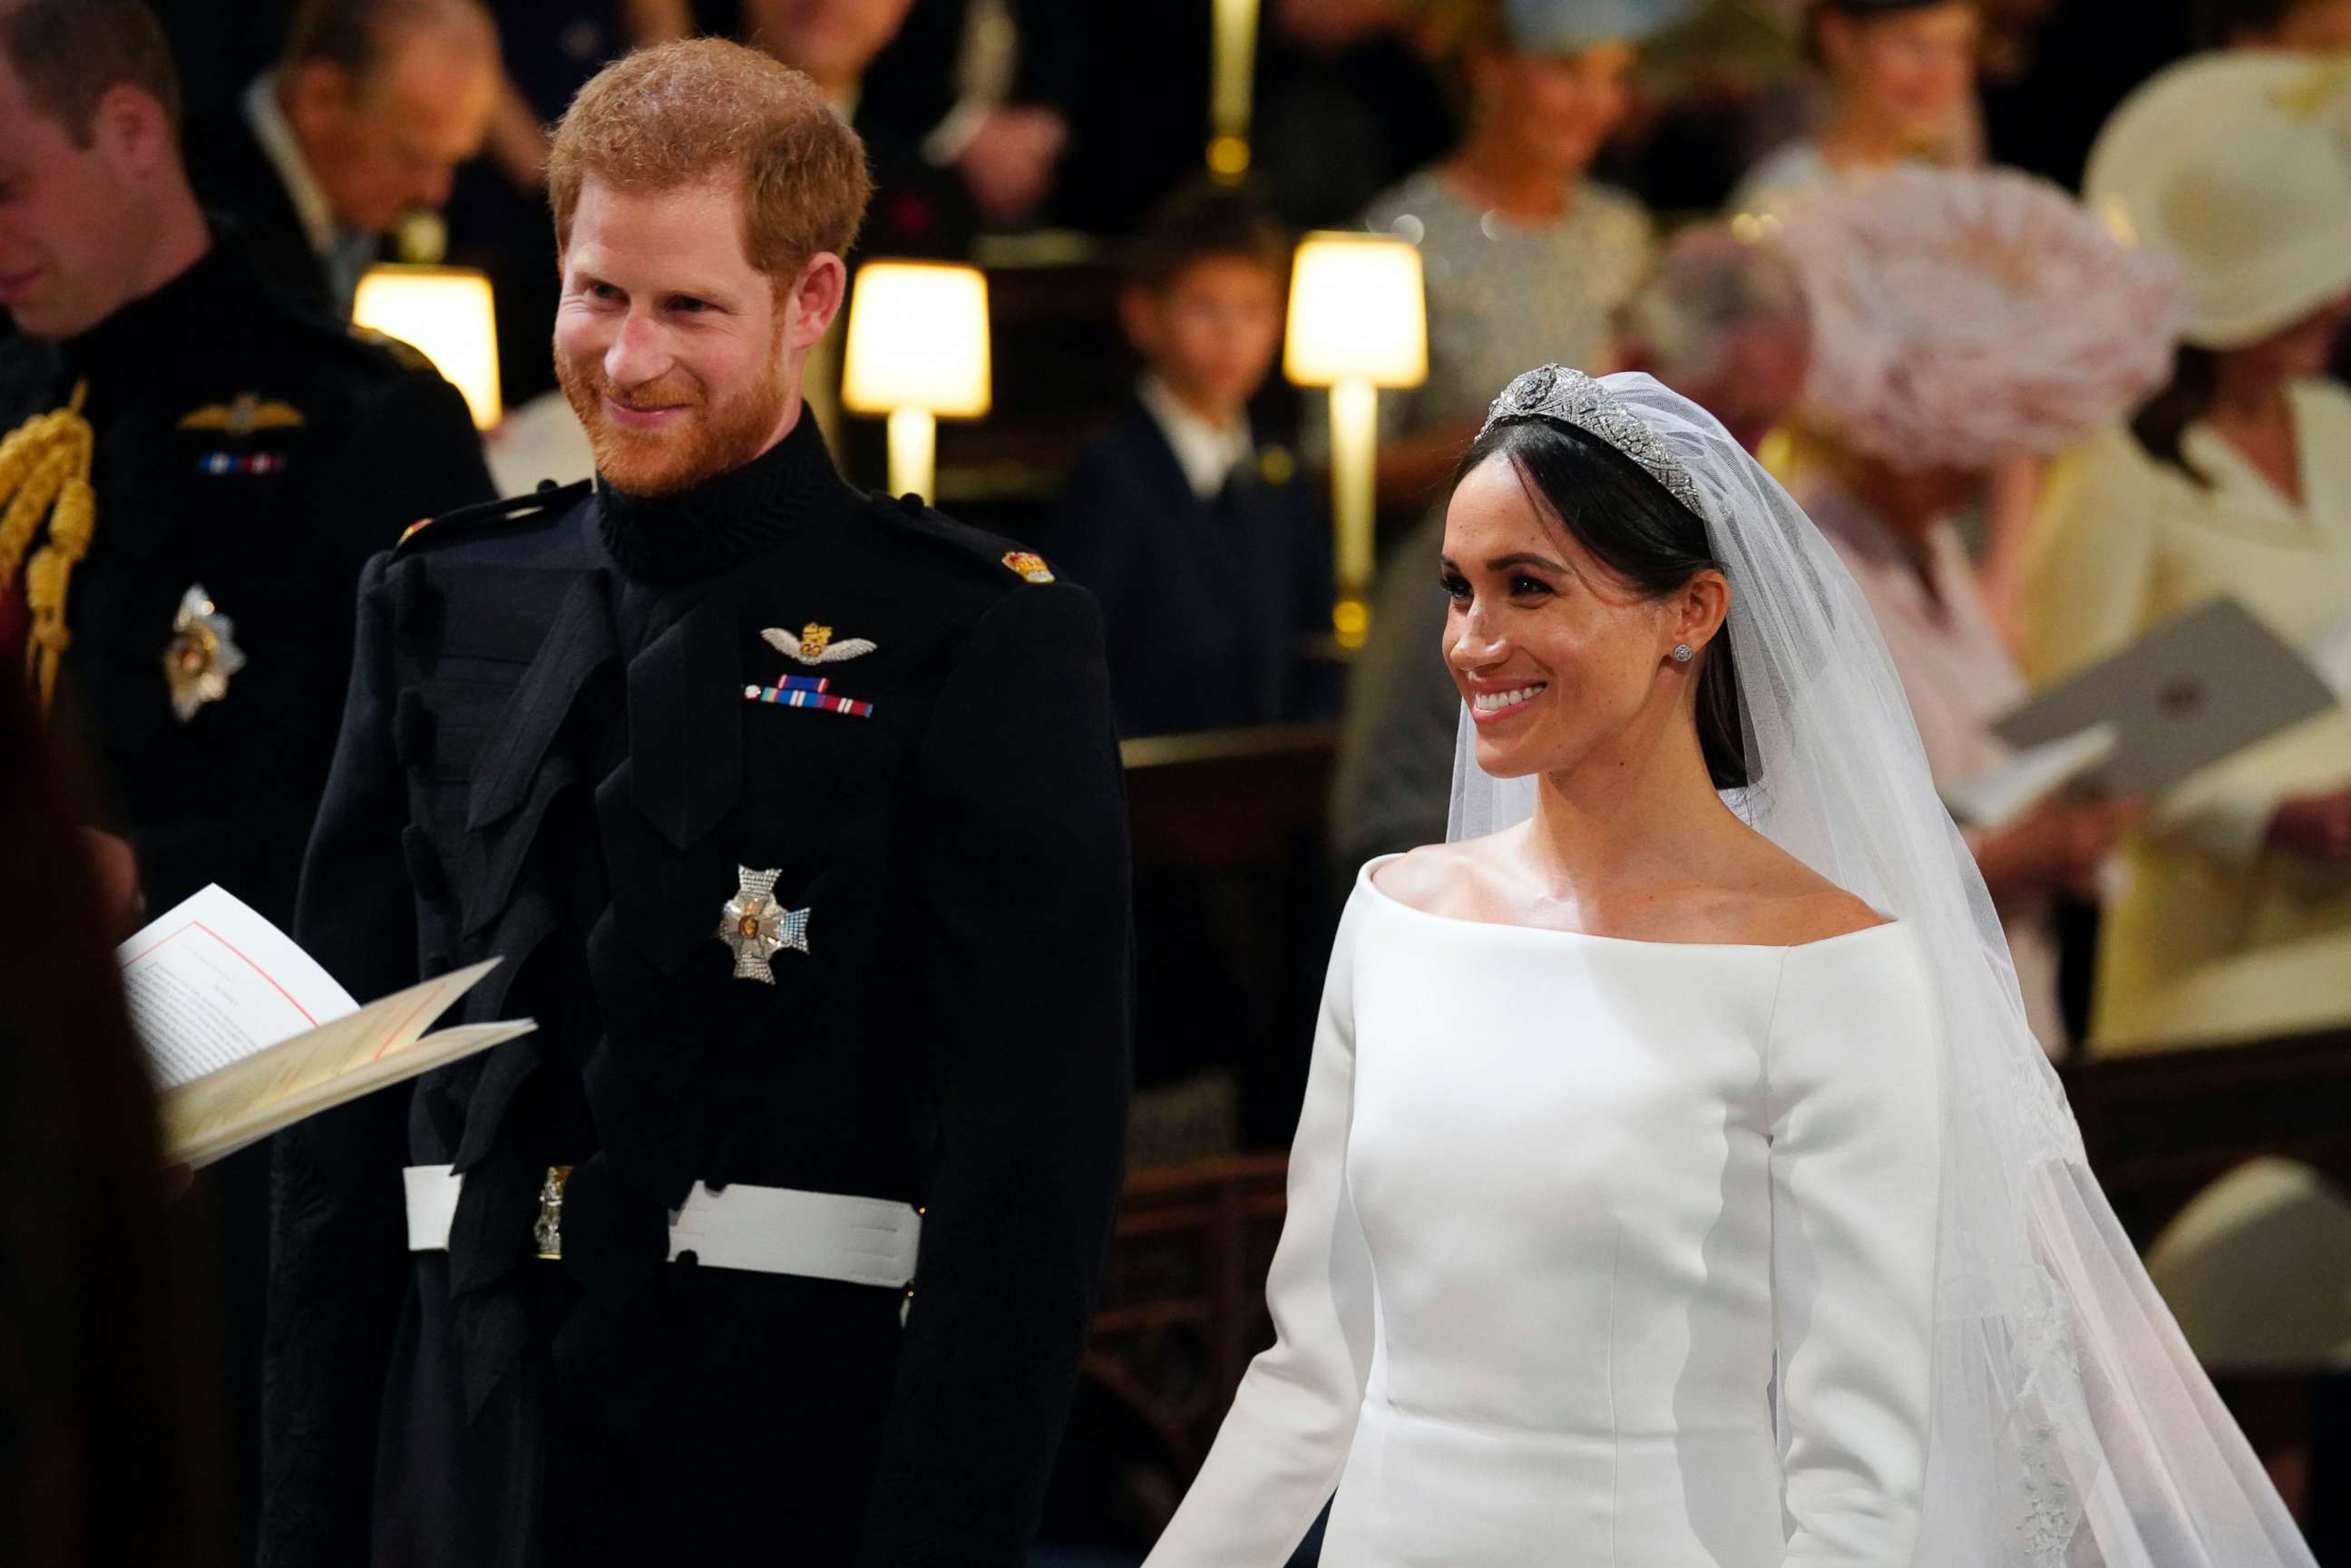 PHOTO: Prince Harry and Meghan Markle, during their wedding ceremony at St. George's Chapel in Windsor Castle in Windsor, May 19, 2018.